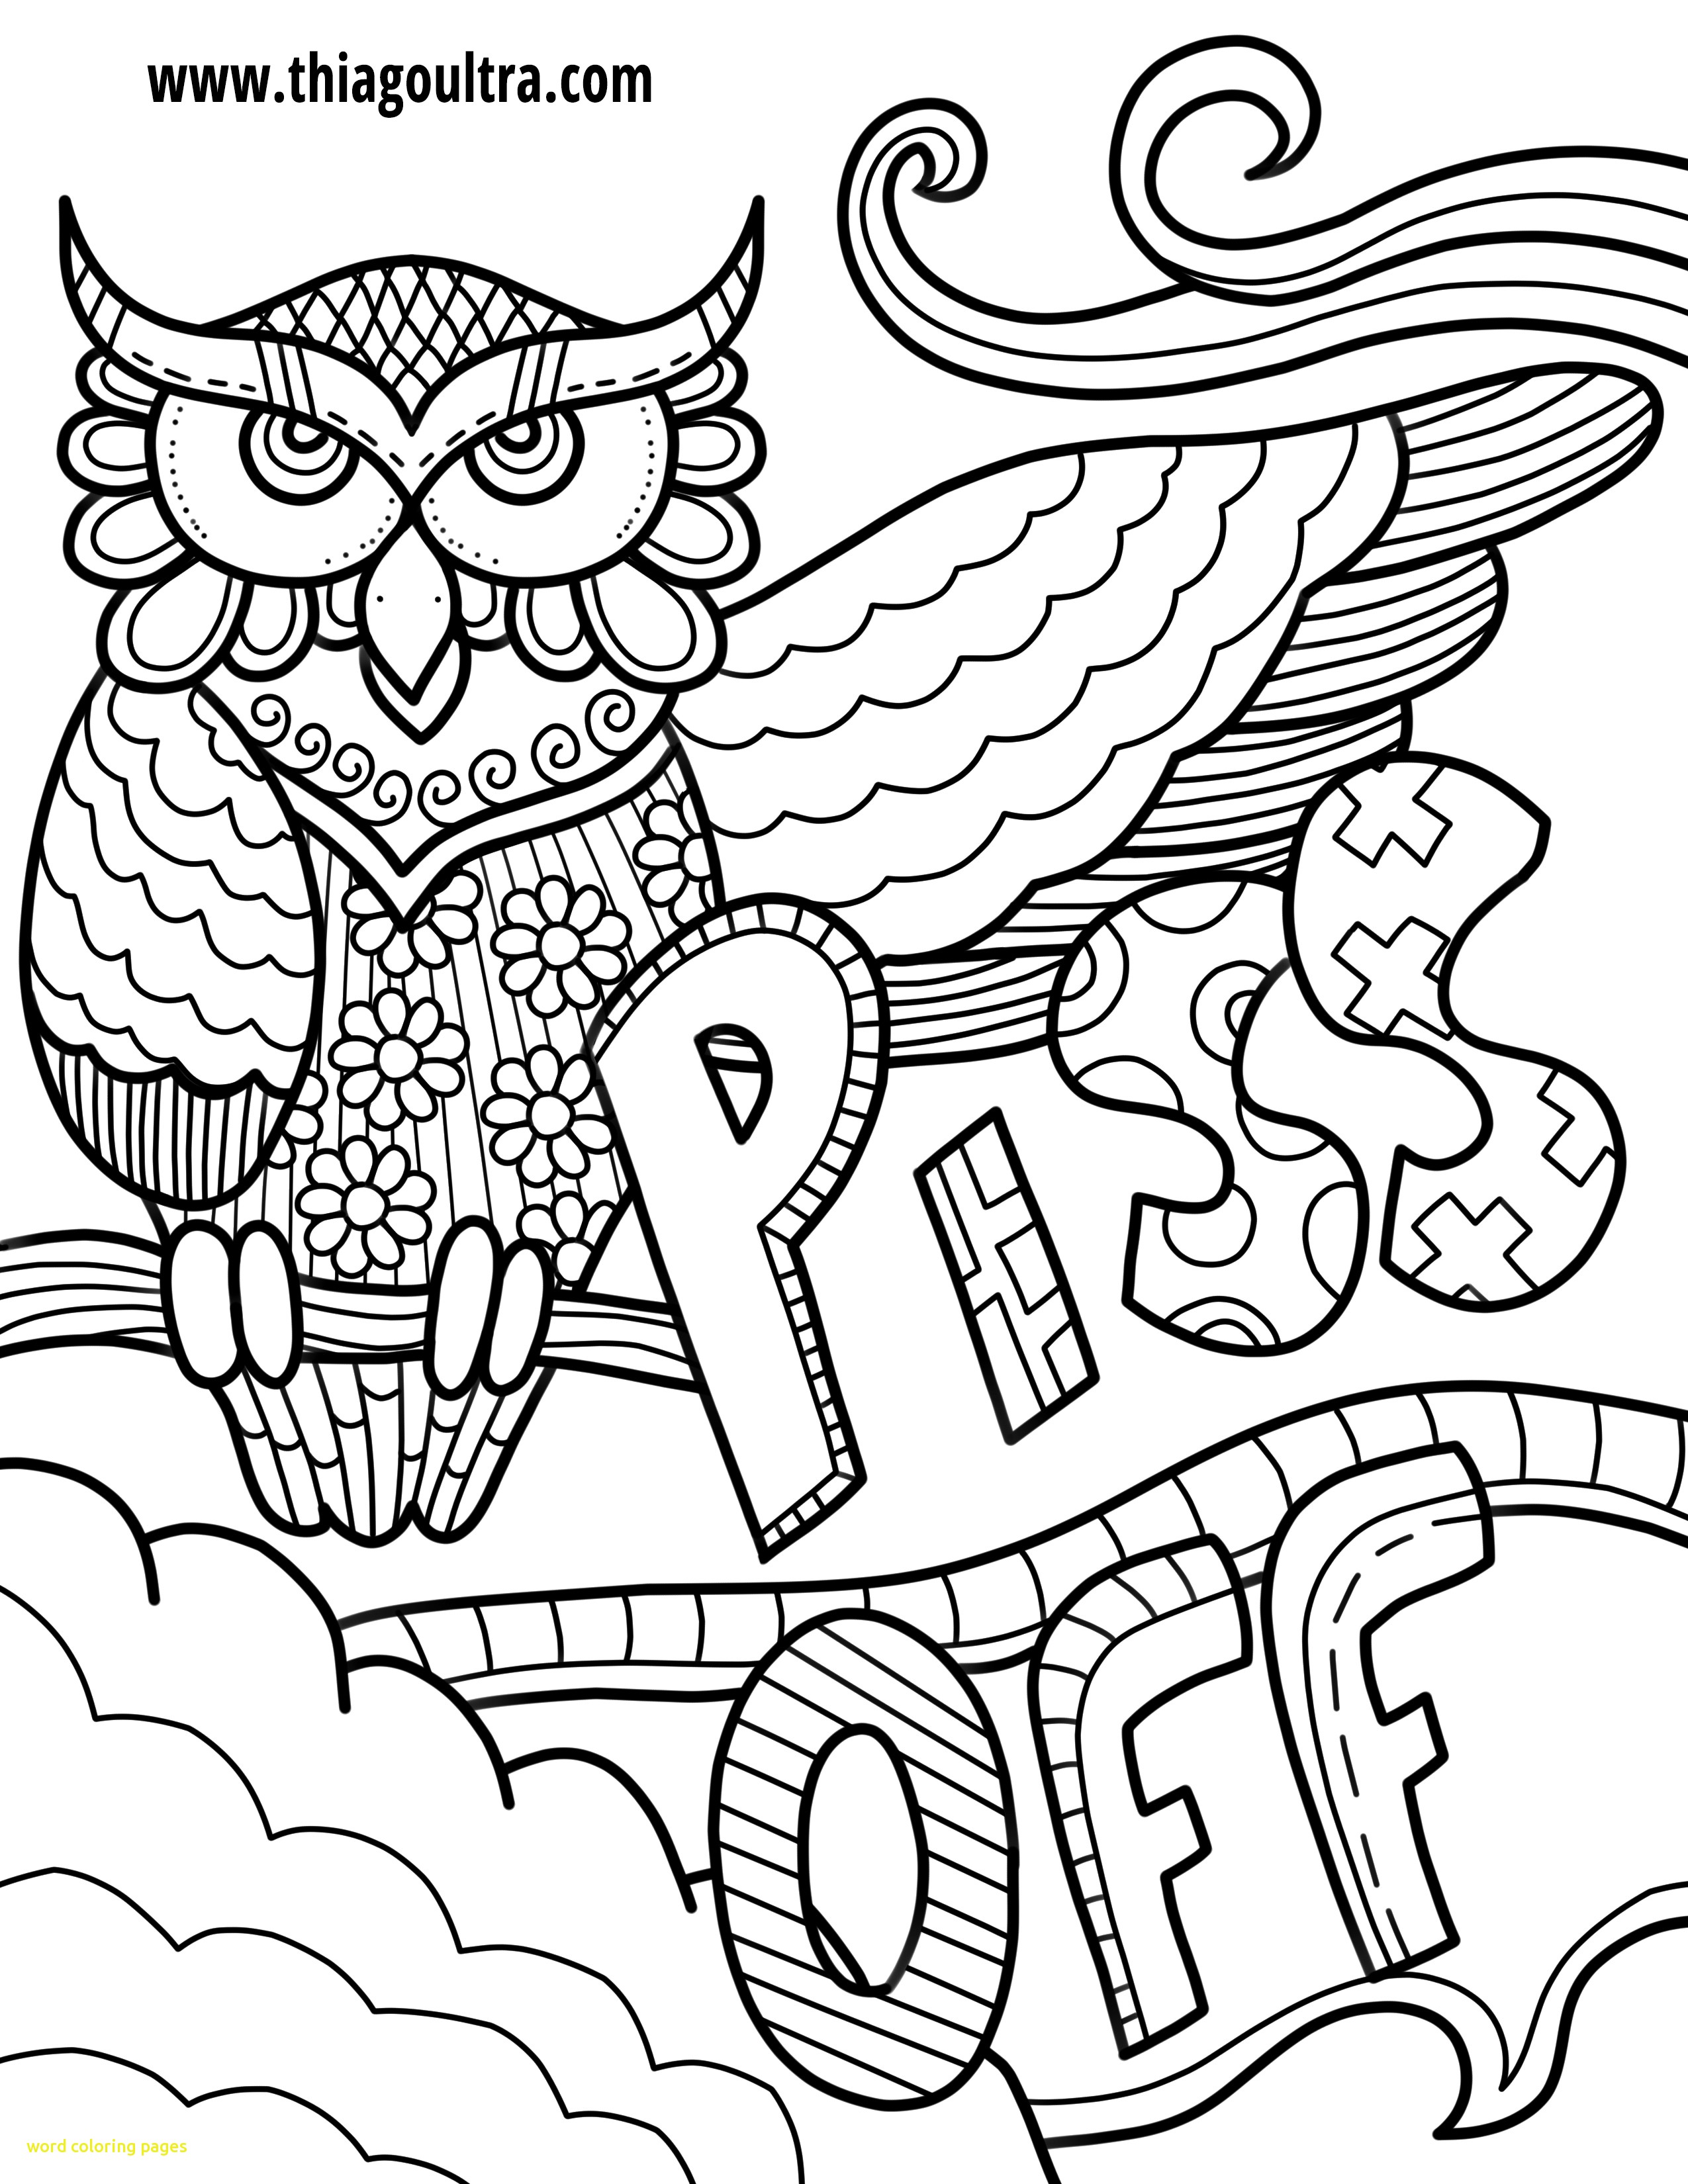 Sight Word Coloring Pages Free Pdf